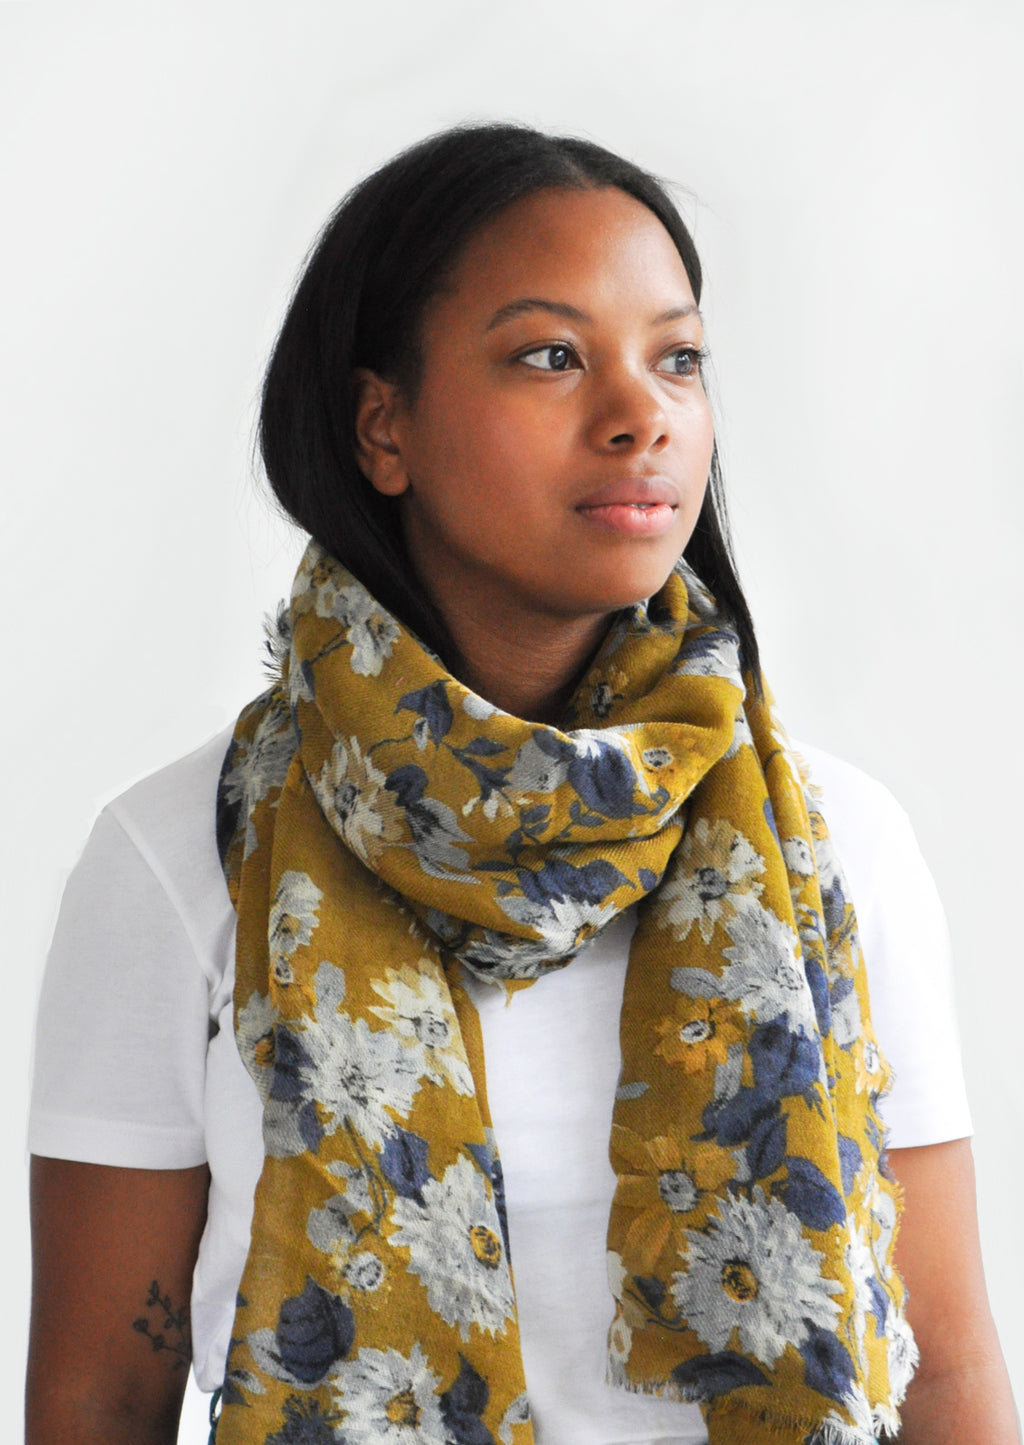 4: Product shot of woman wearing scarf and white top.